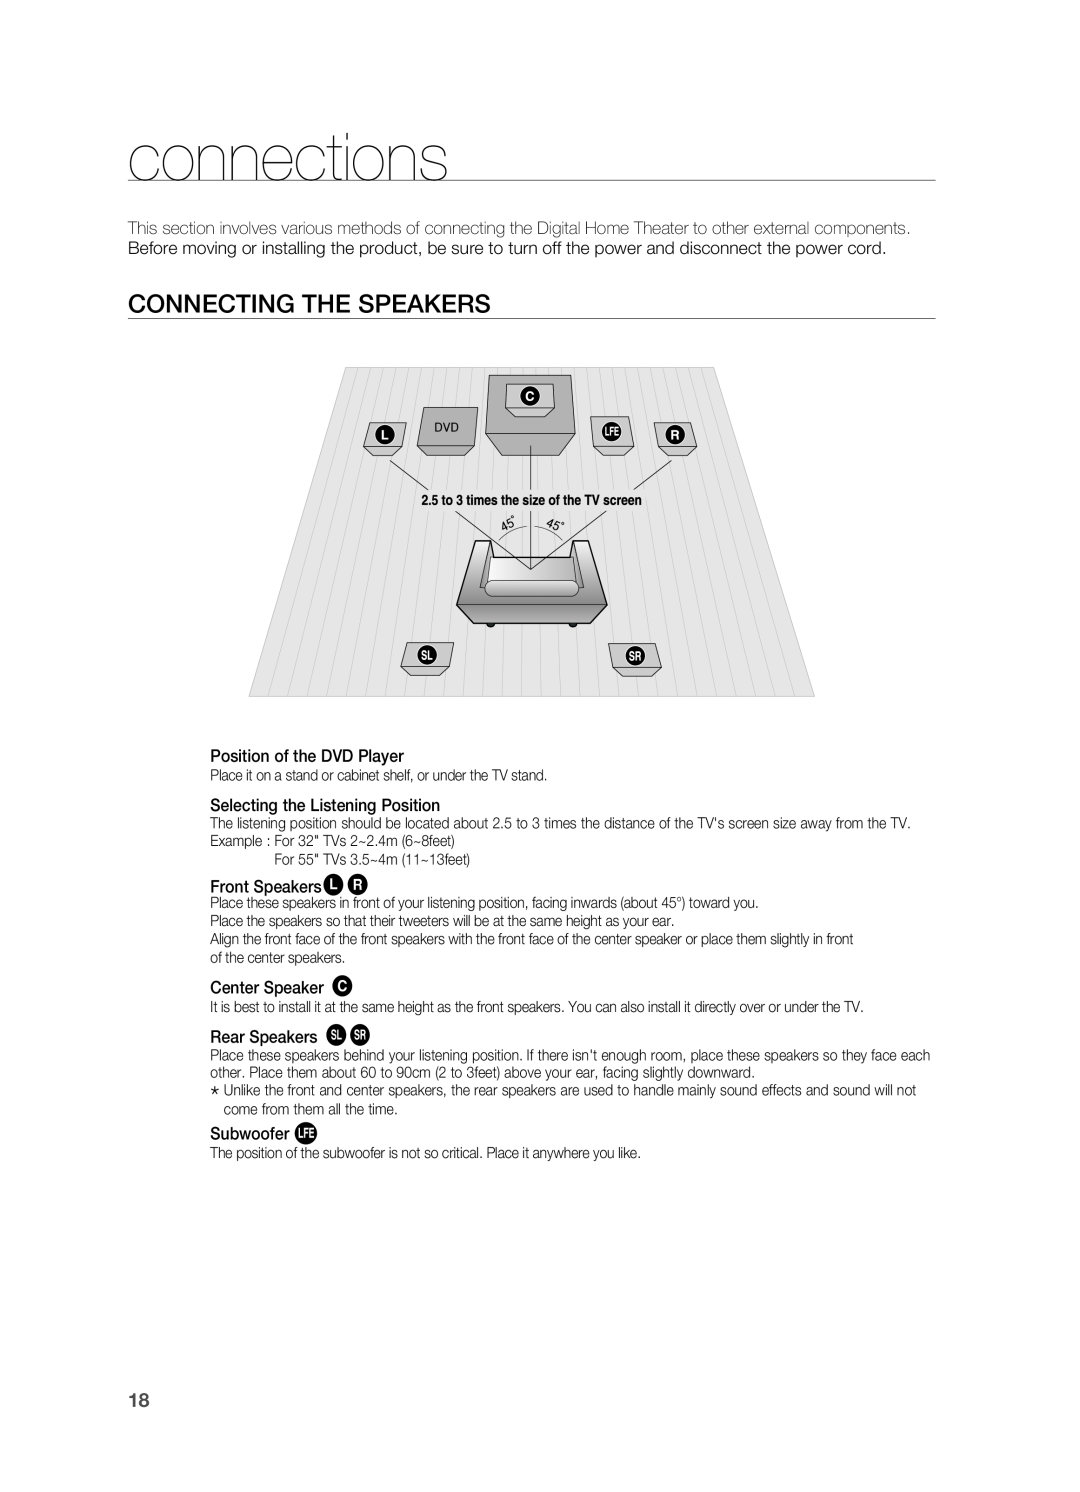 Samsung HT-TZ312 manual connections, Connecting the Speakers 